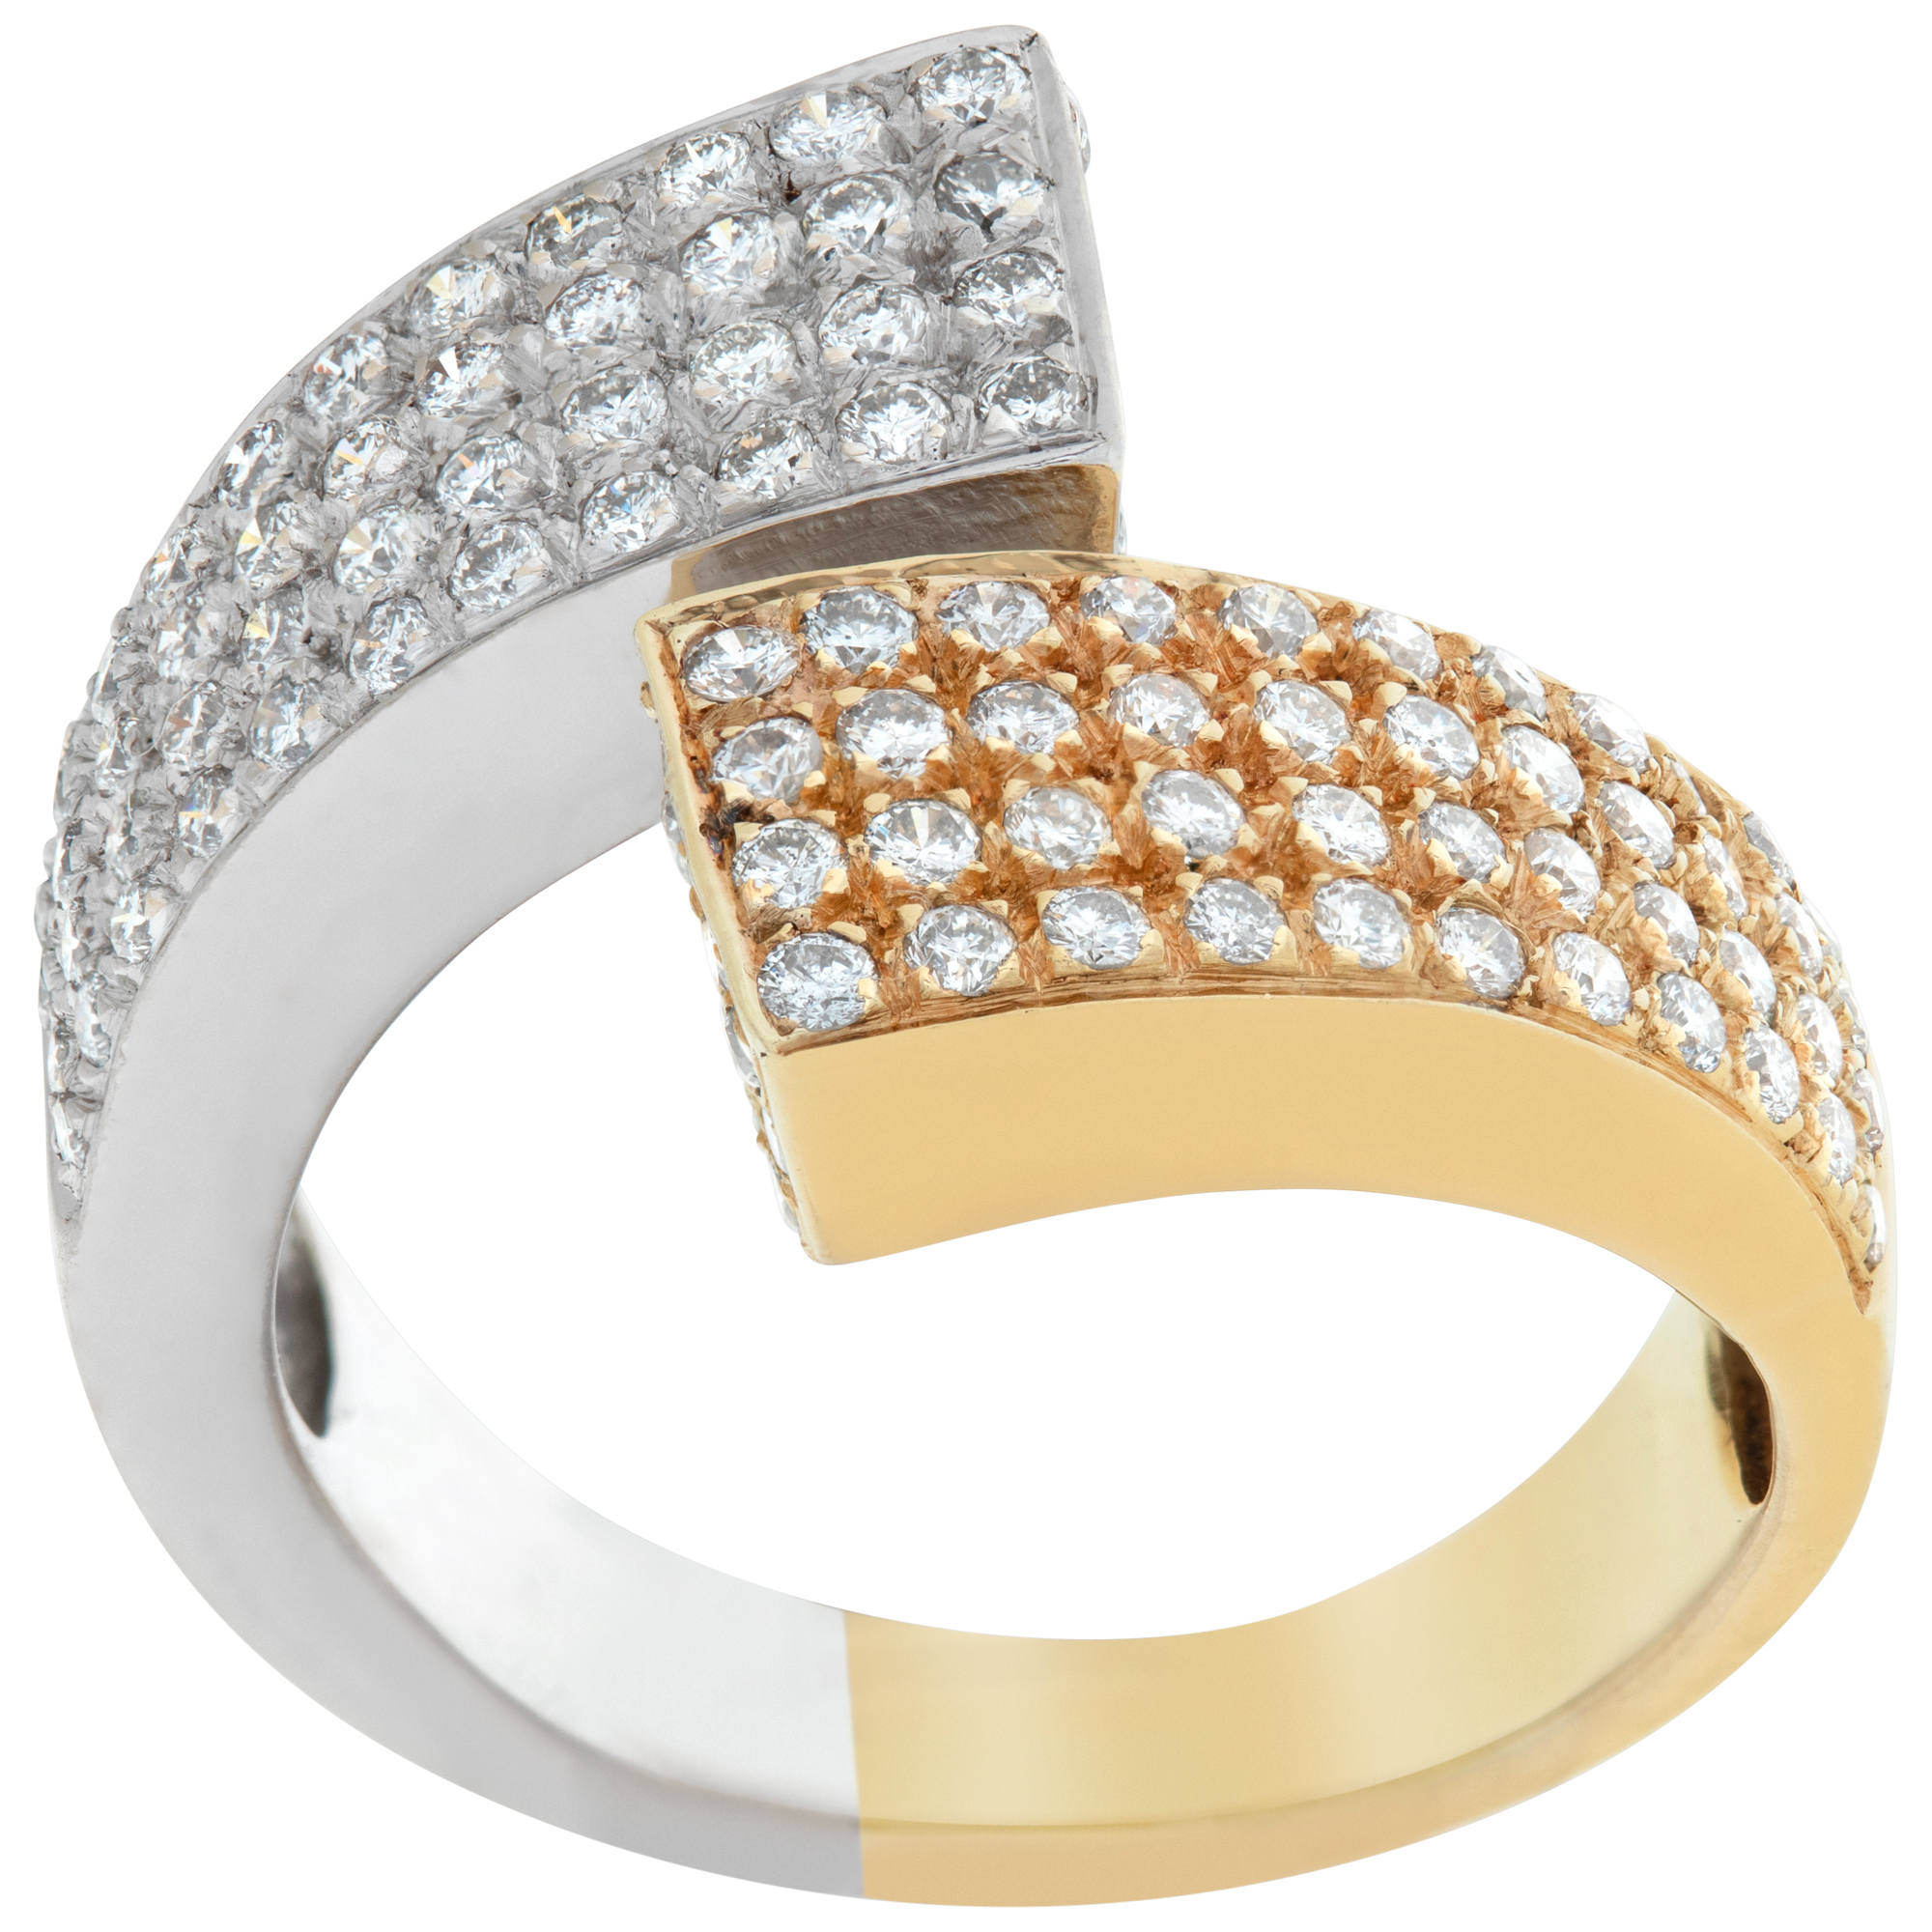 Sparkling diamond ring in 18k white & yellow gold. 1.40cts in diamonds. Size.6